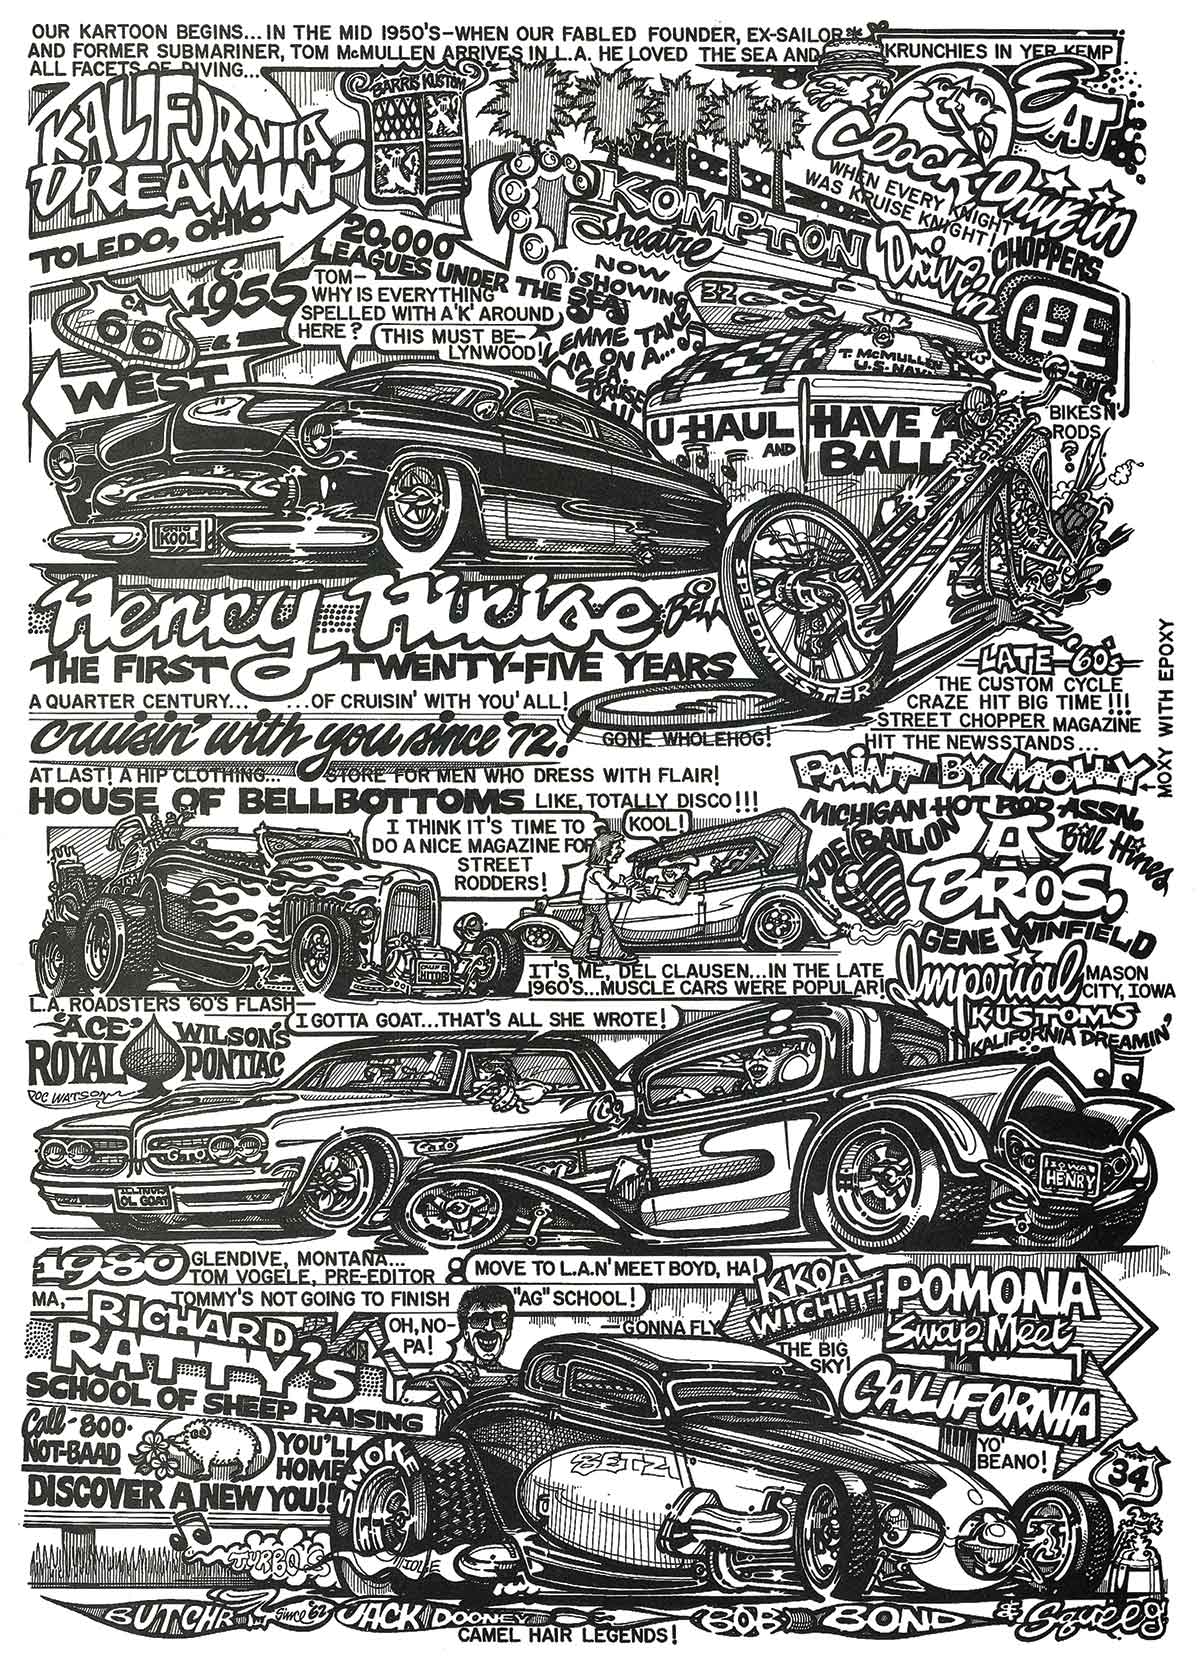 Illustrative cartoon graphic artwork of Henry HiRise that Dave Bell put pen to paper and created to commemorate 25 years of Street Rodder and Henry HiRise. In the very middle is a tribute to Tom McMullen and Tex Smith seated in his ’34 Ford Phaeton about the birth of SRM and Henry HiRise.